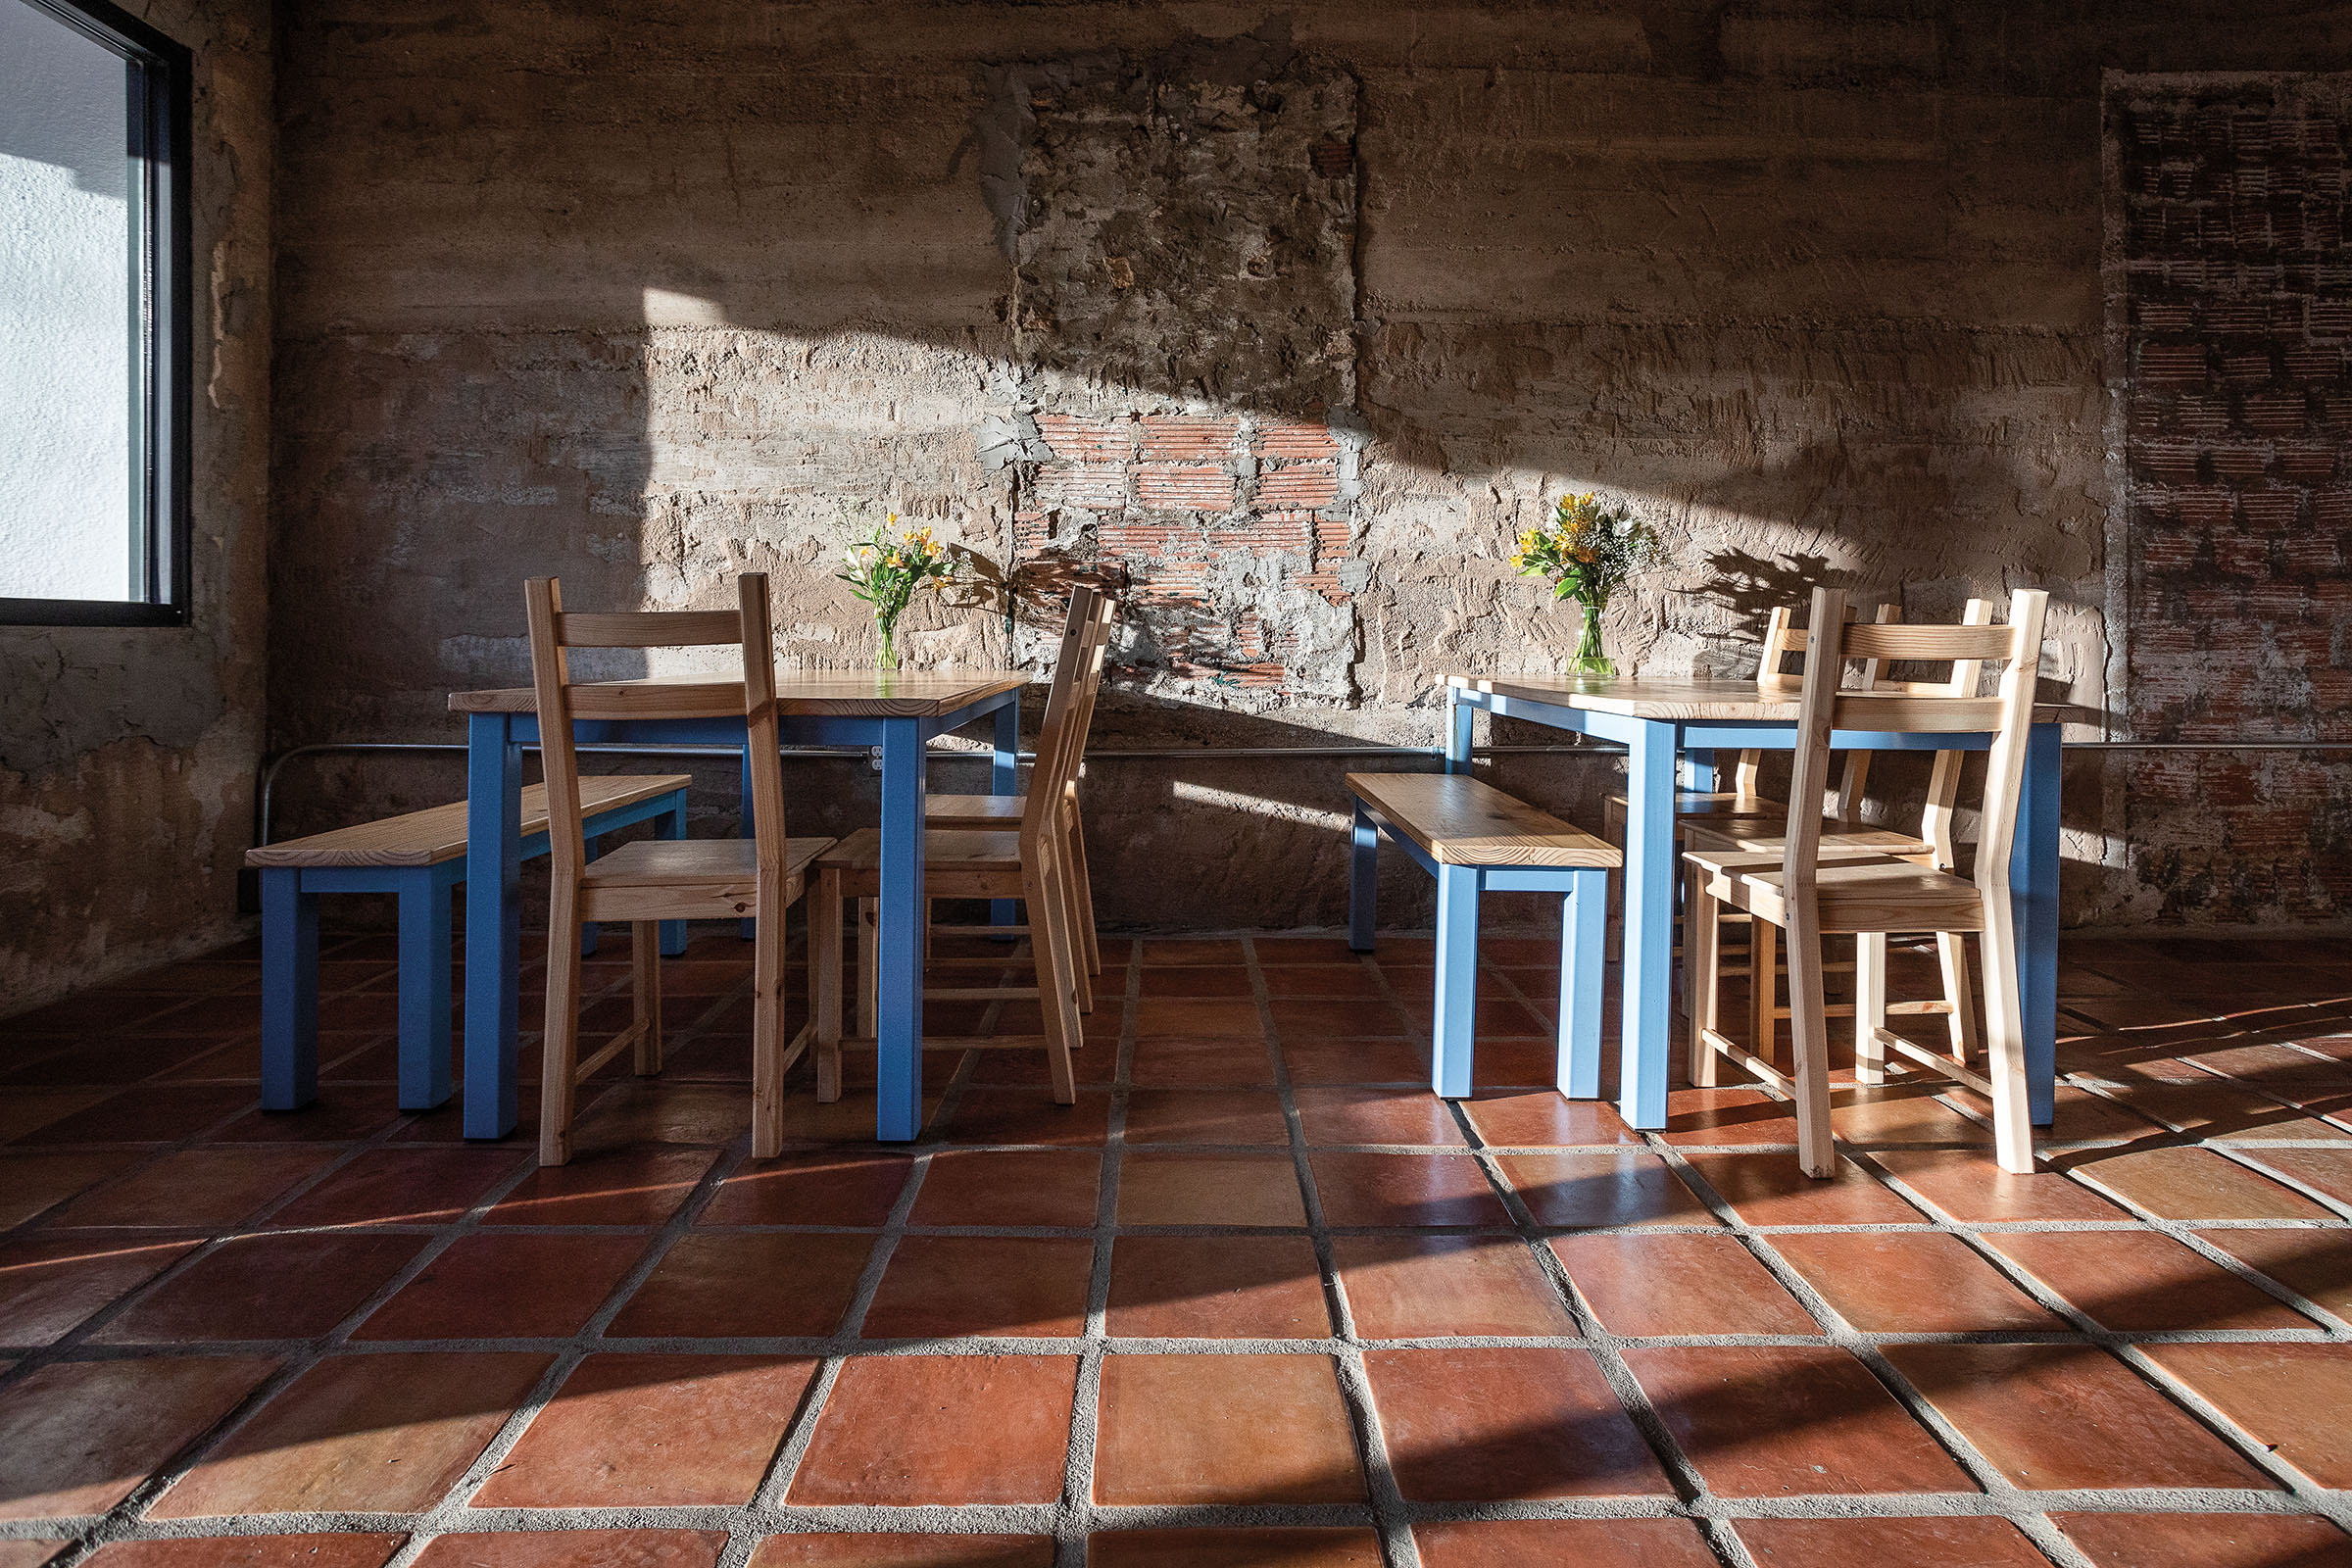 Wooden chairs and tables on a red brick floor in front of a stone wall